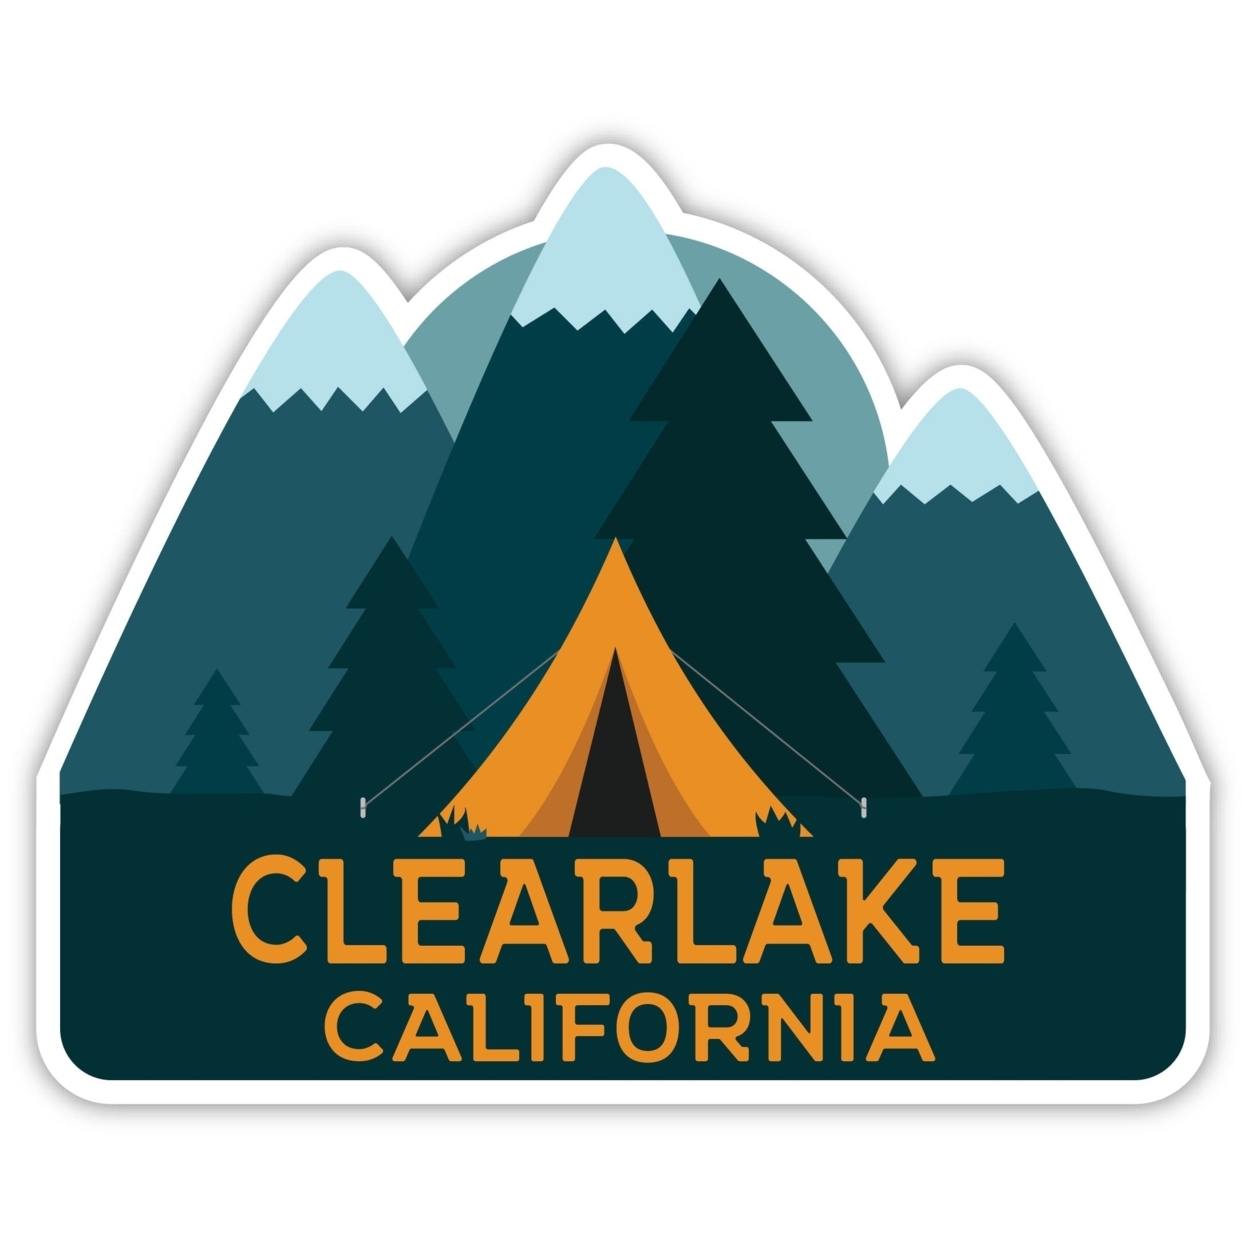 Clearlake California Souvenir Decorative Stickers (Choose Theme And Size) - 4-Pack, 6-Inch, Bear